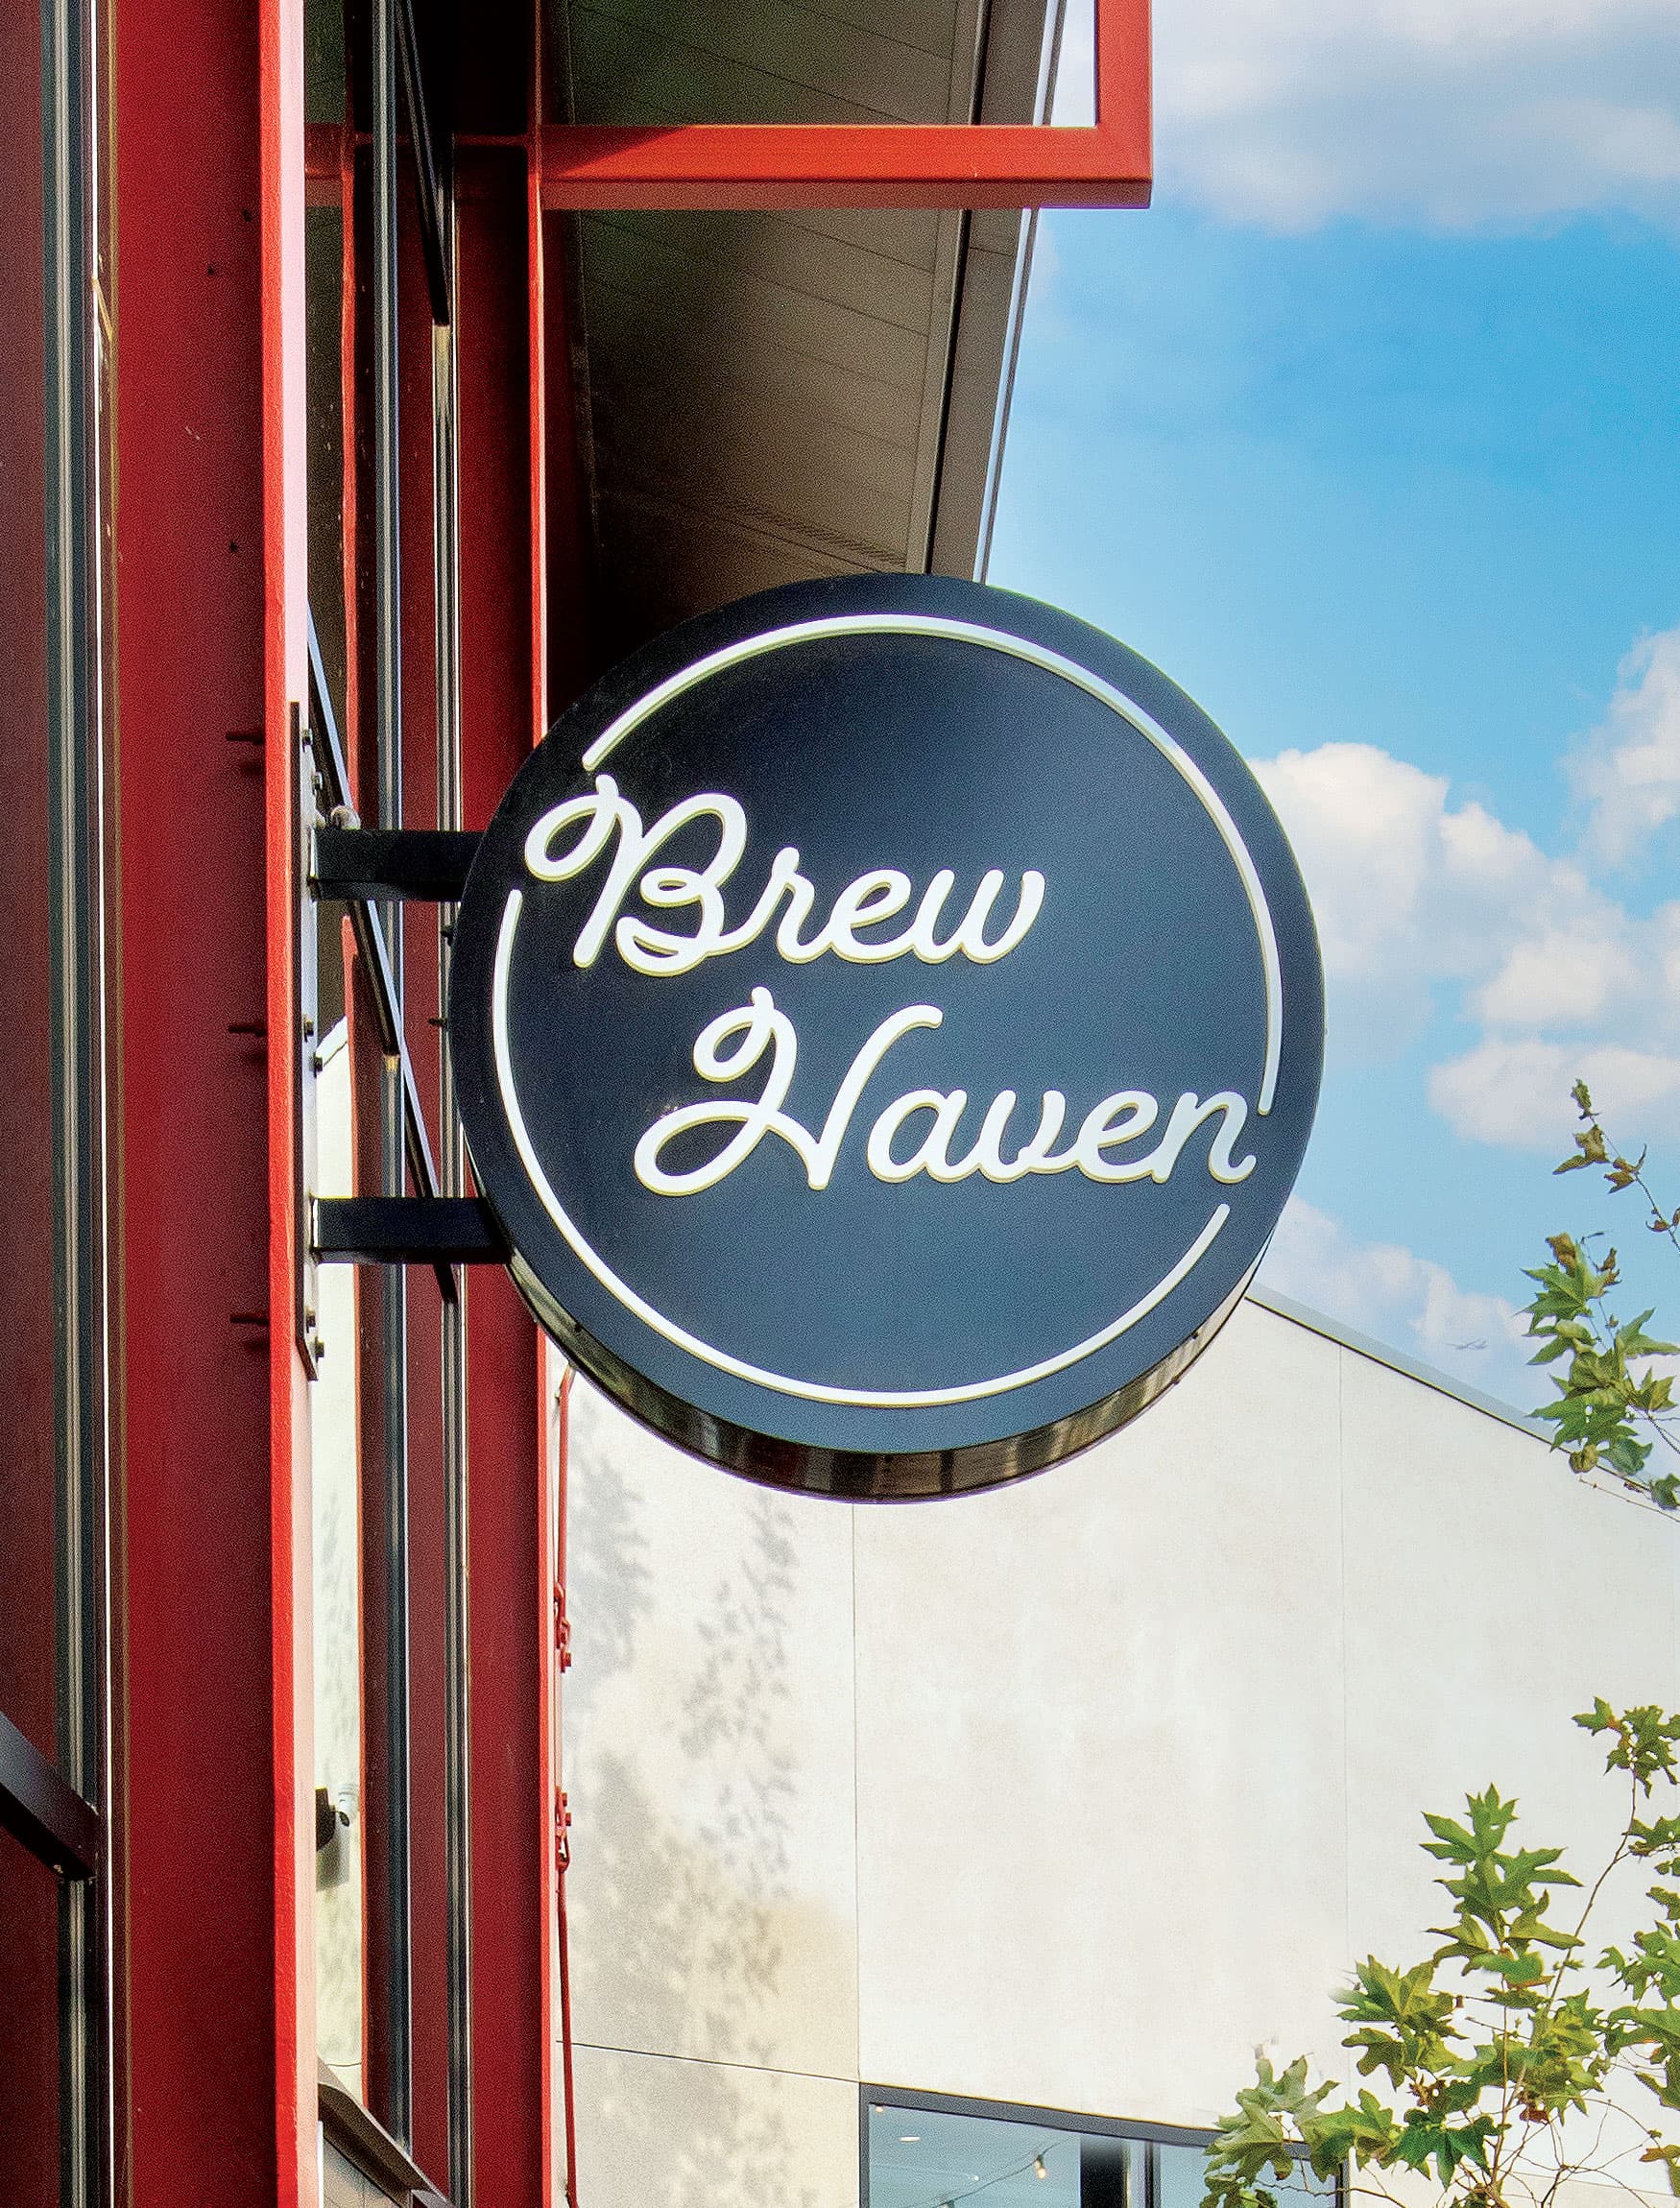 Pedestrian blade directional for Brew Haven in New Haven Marketplace in Ontario, California. Retail design signage. 